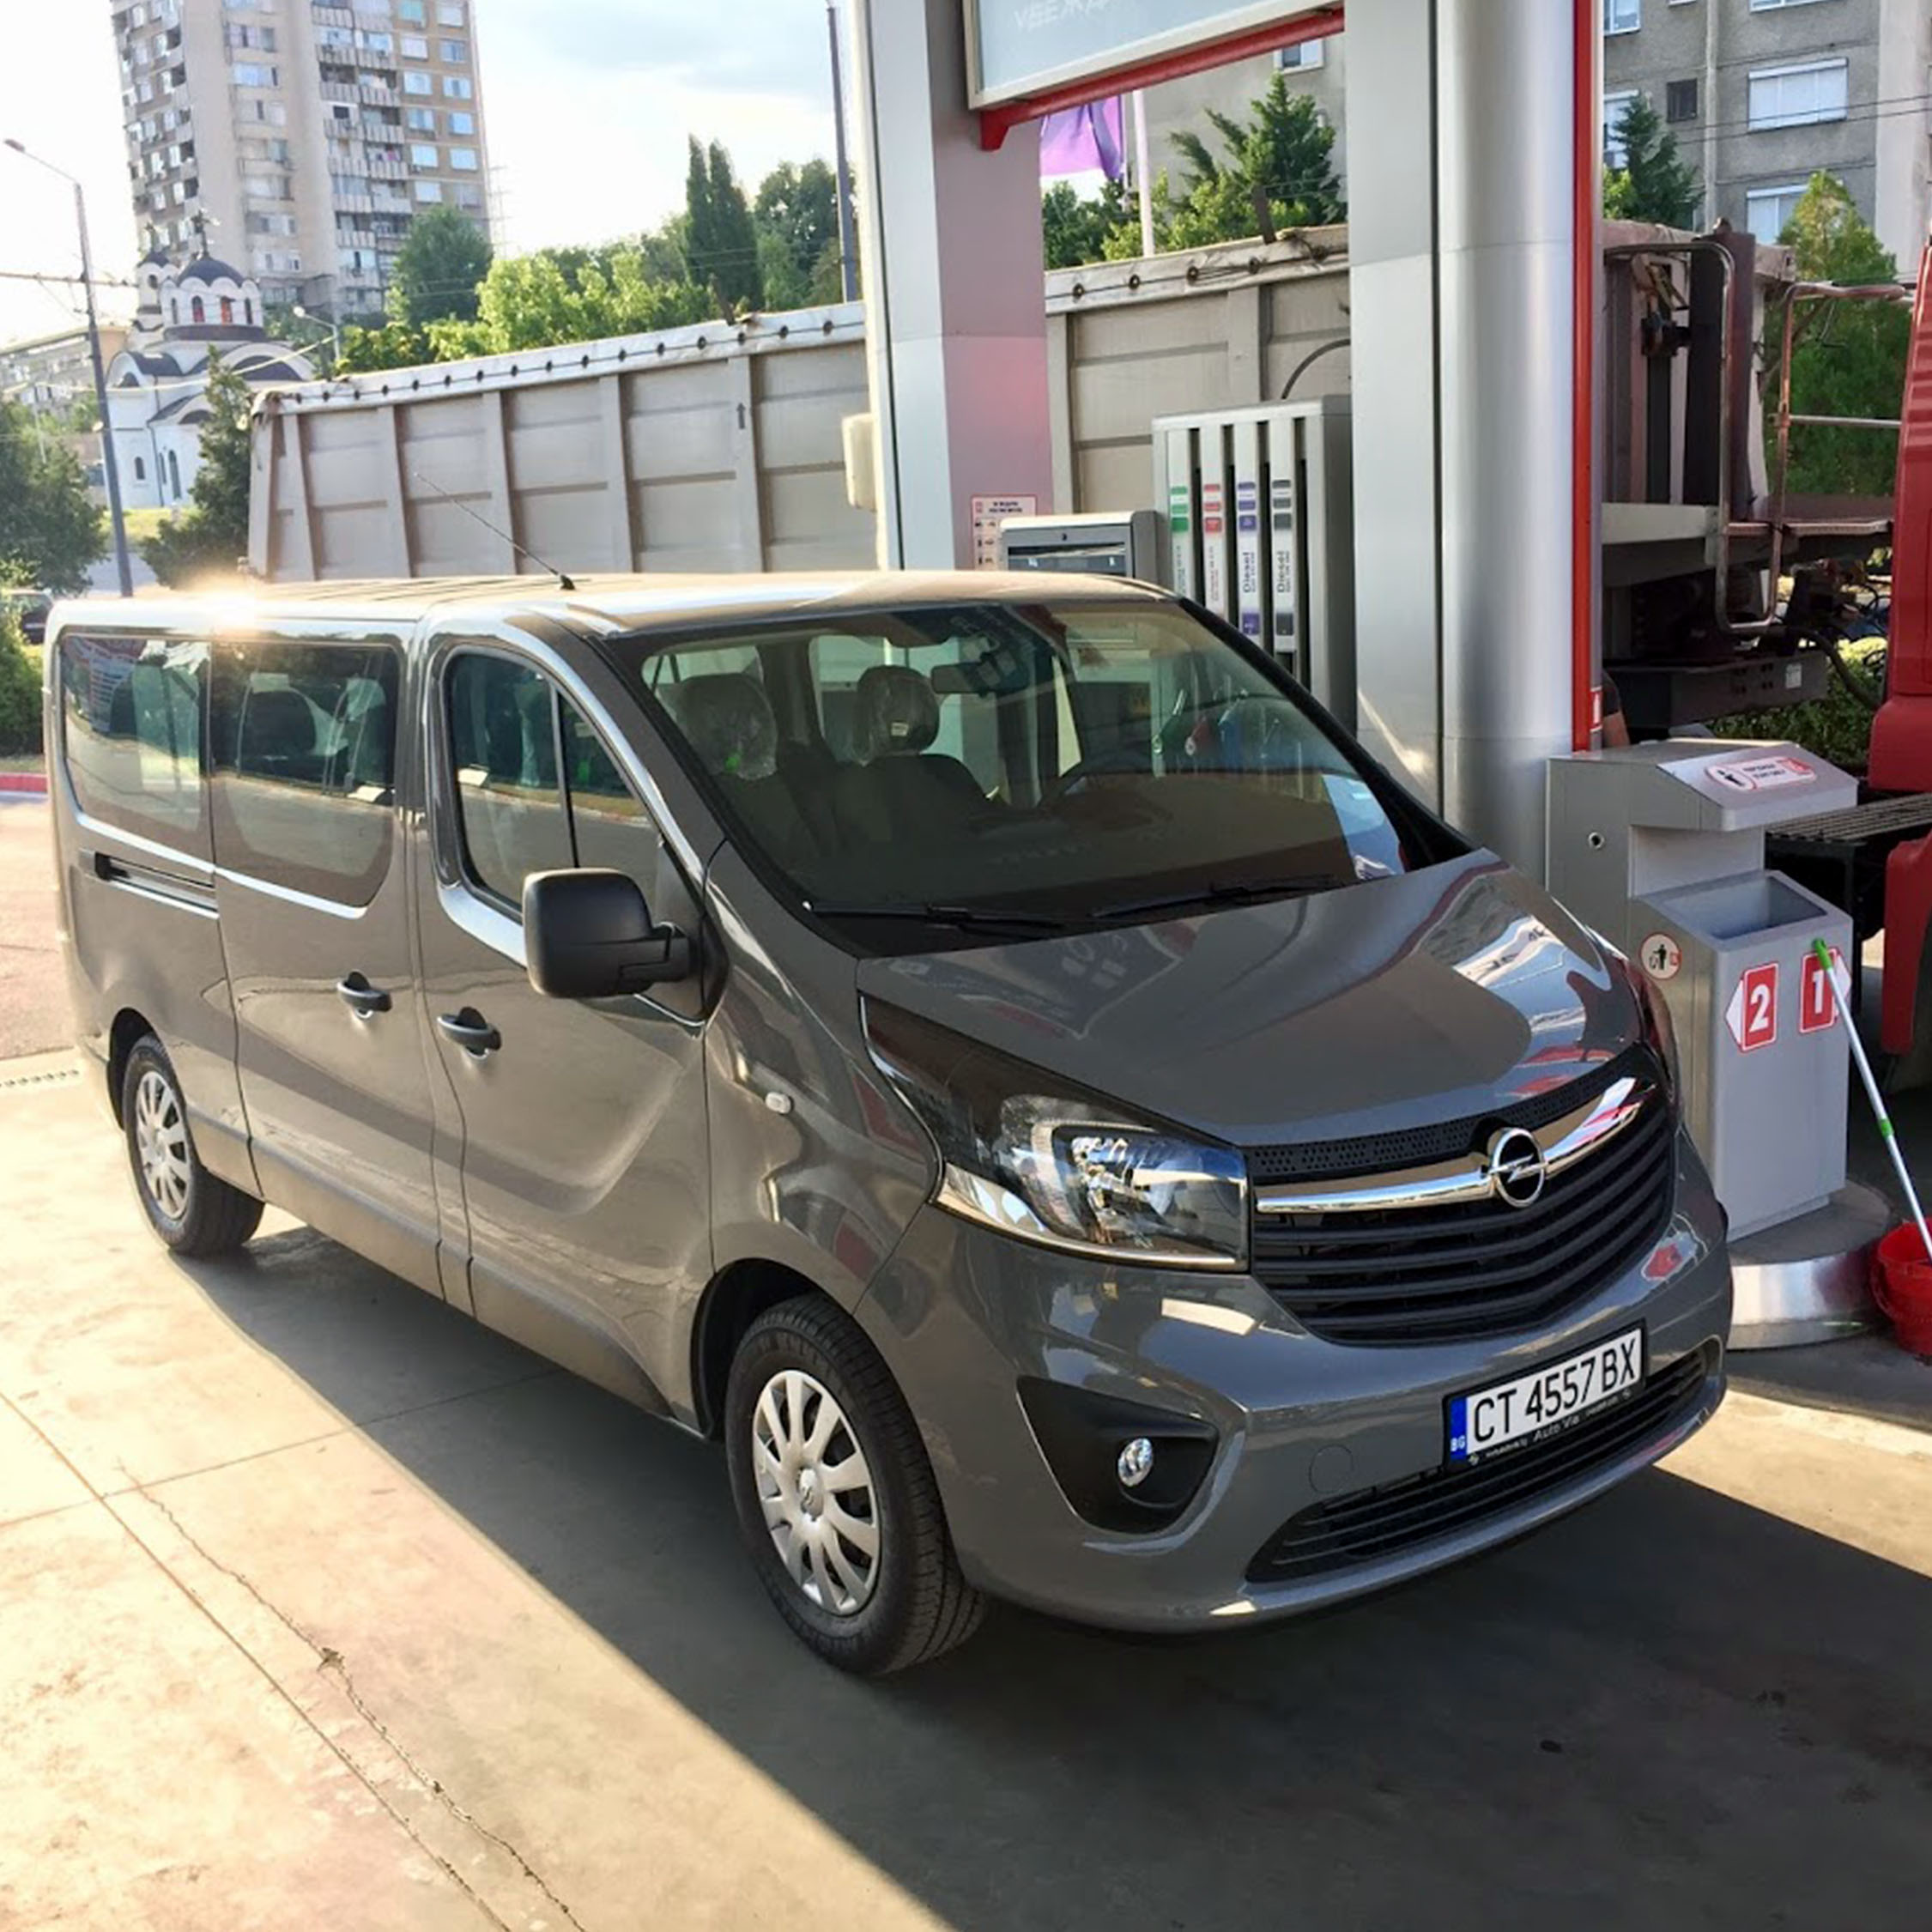 how-to-hire-a-driver-benefits-of-a-private-taxi-opel-vivaro-8+1-van